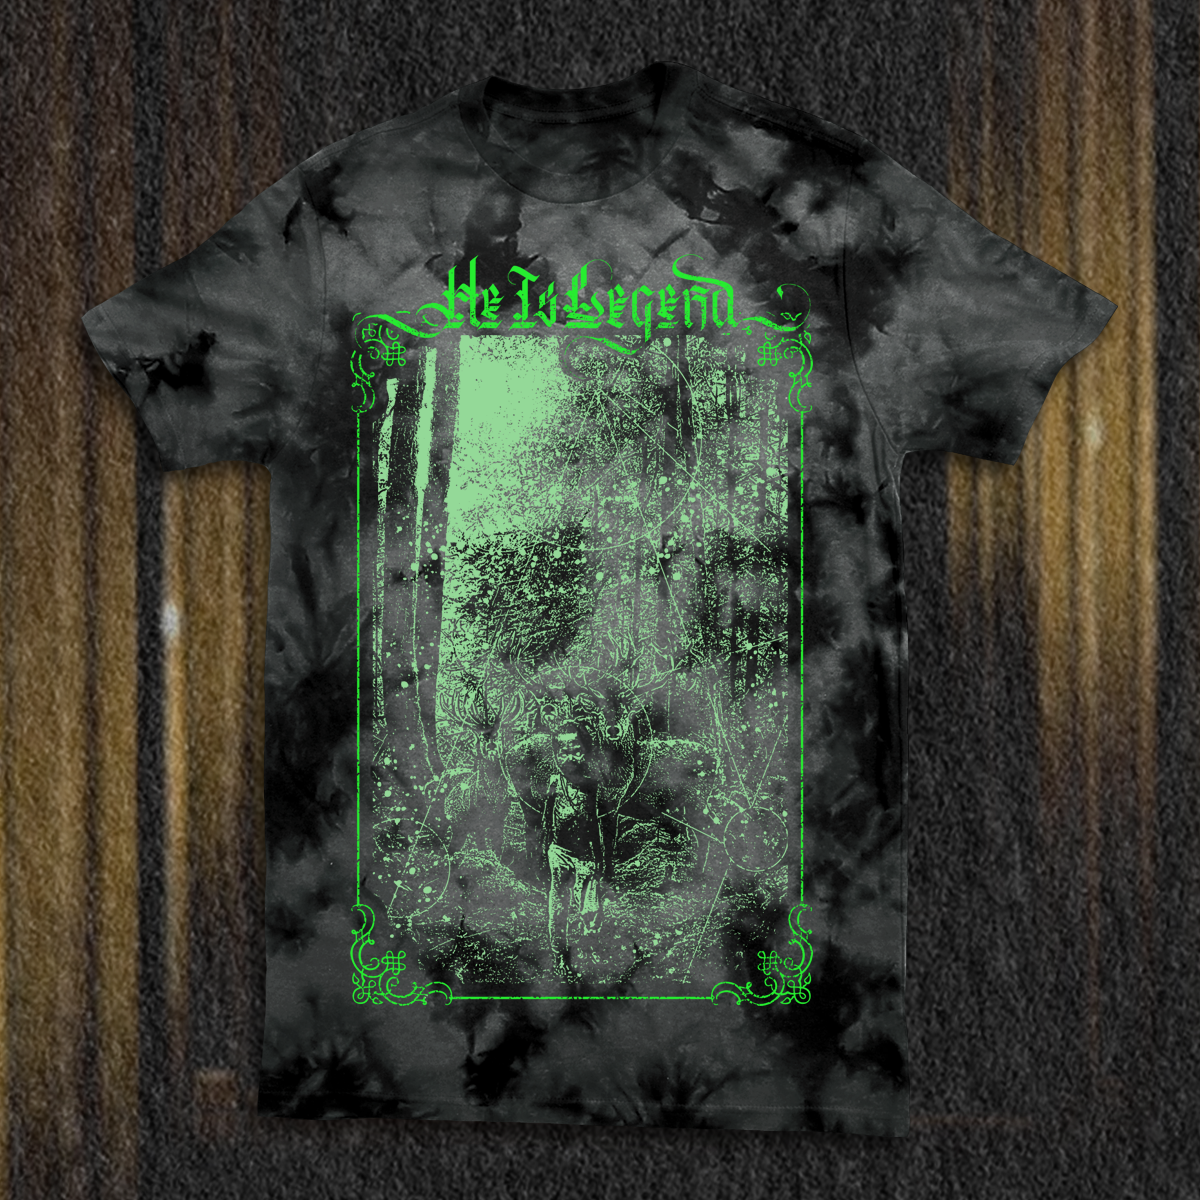 HE IS LEGEND "THE FOREST" BLACK CRYSTAL TIE DYE SHIRT